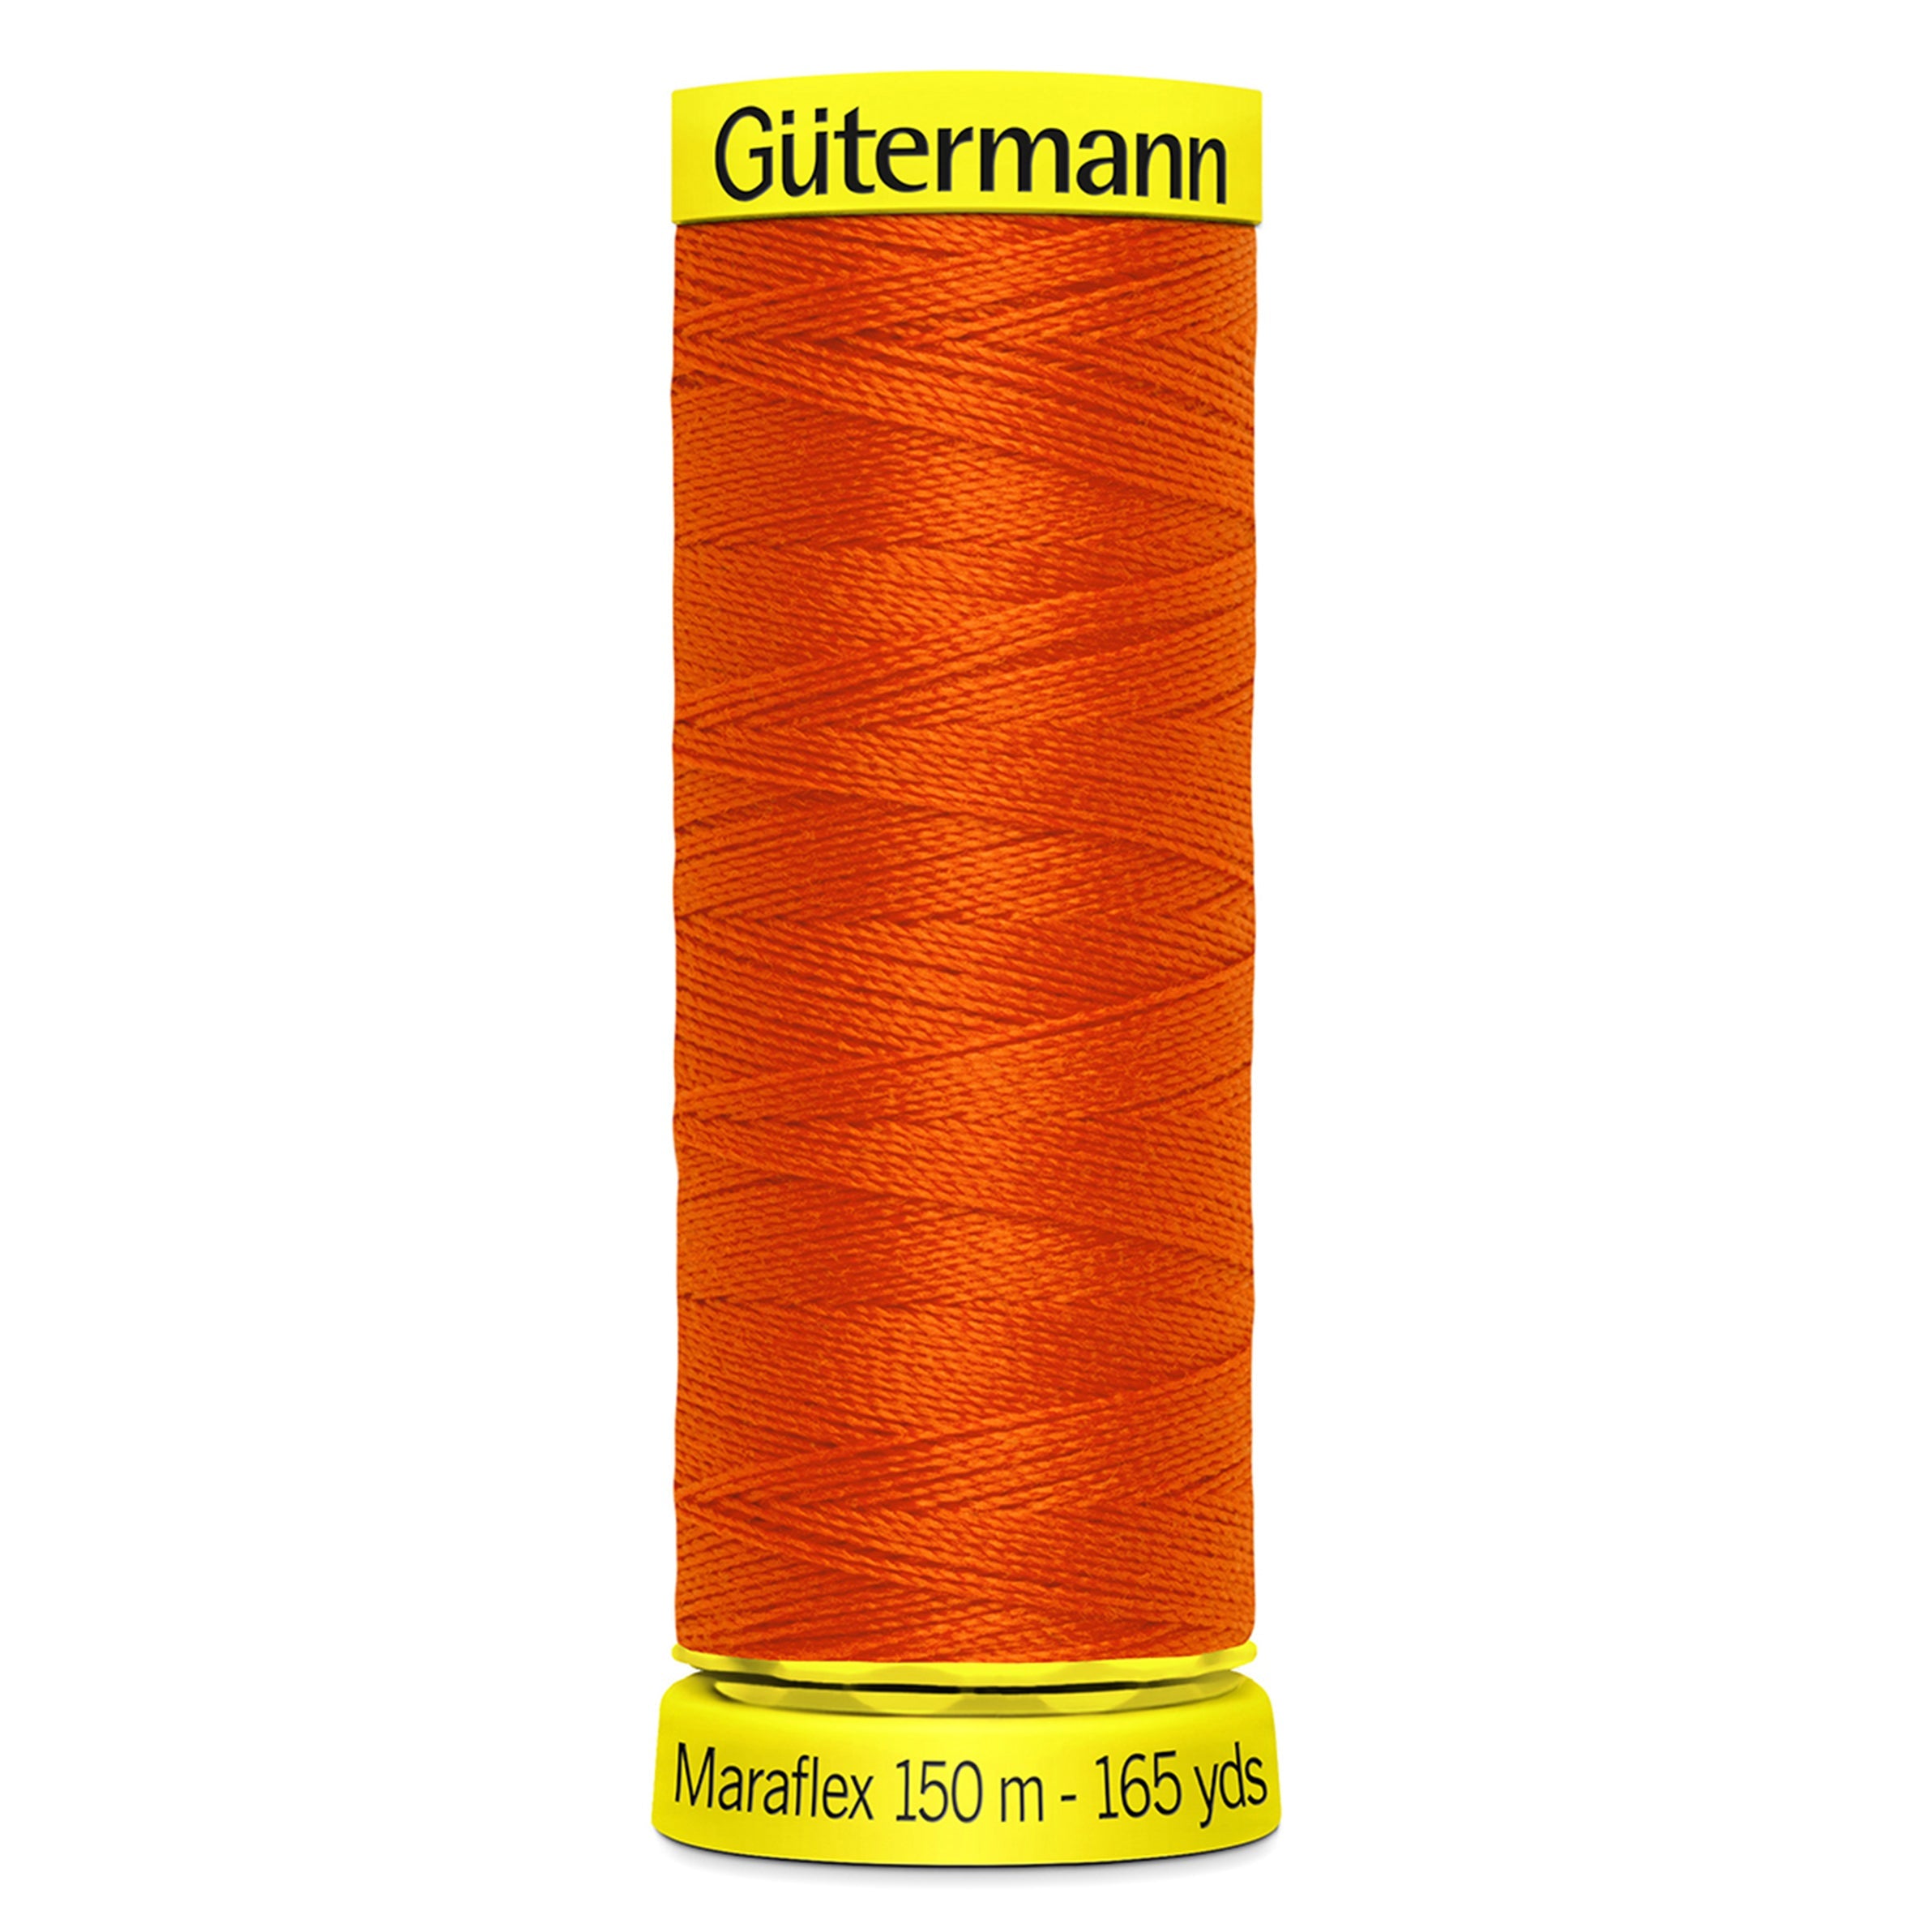 Gutermann Maraflex Stretchy Sewing Thread 150m colour 351 from Jaycotts Sewing Supplies